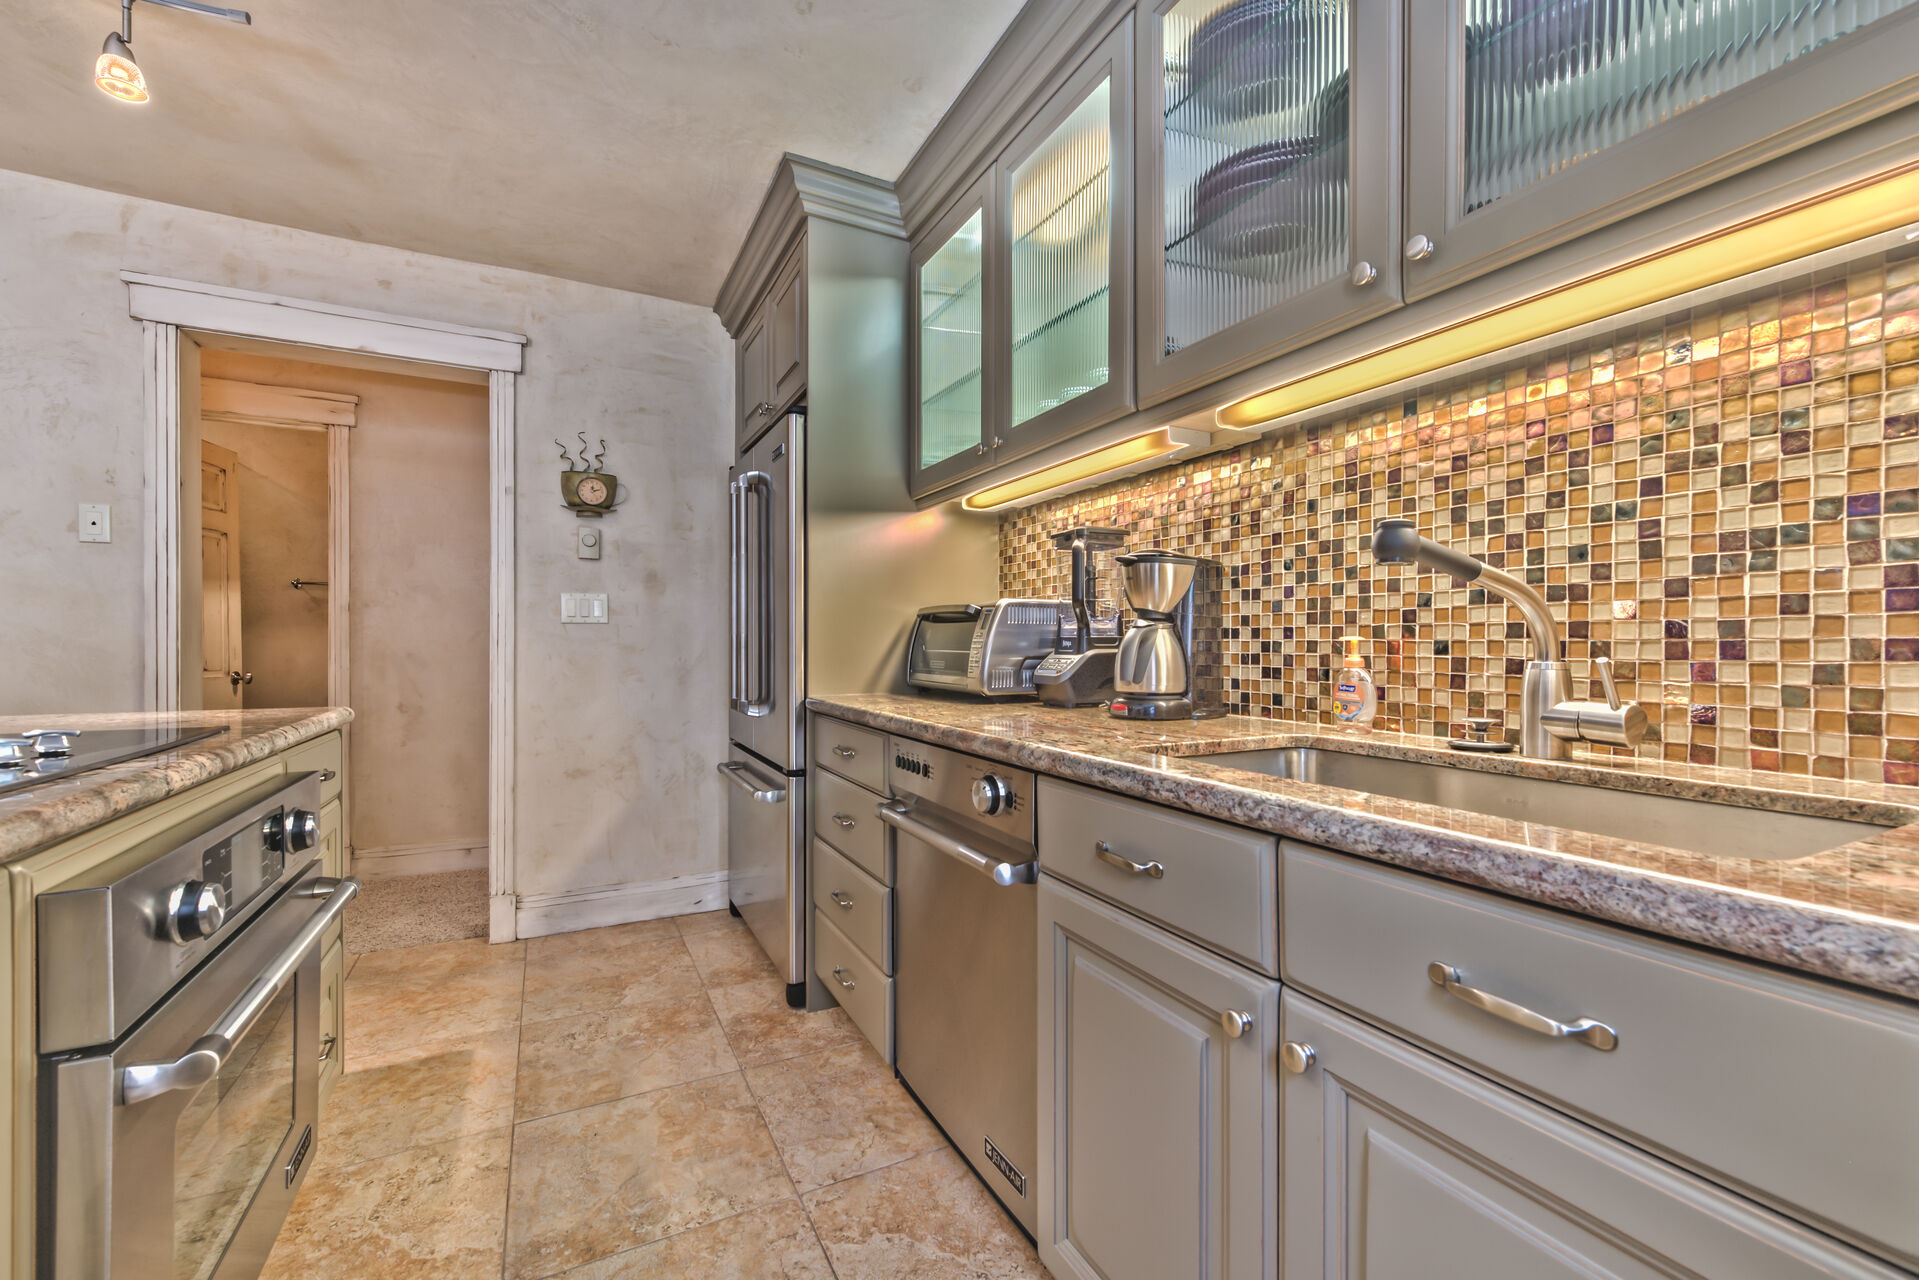 Fully Equipped Kitchen with Granite Countertops, New Stainless Steel Appliances